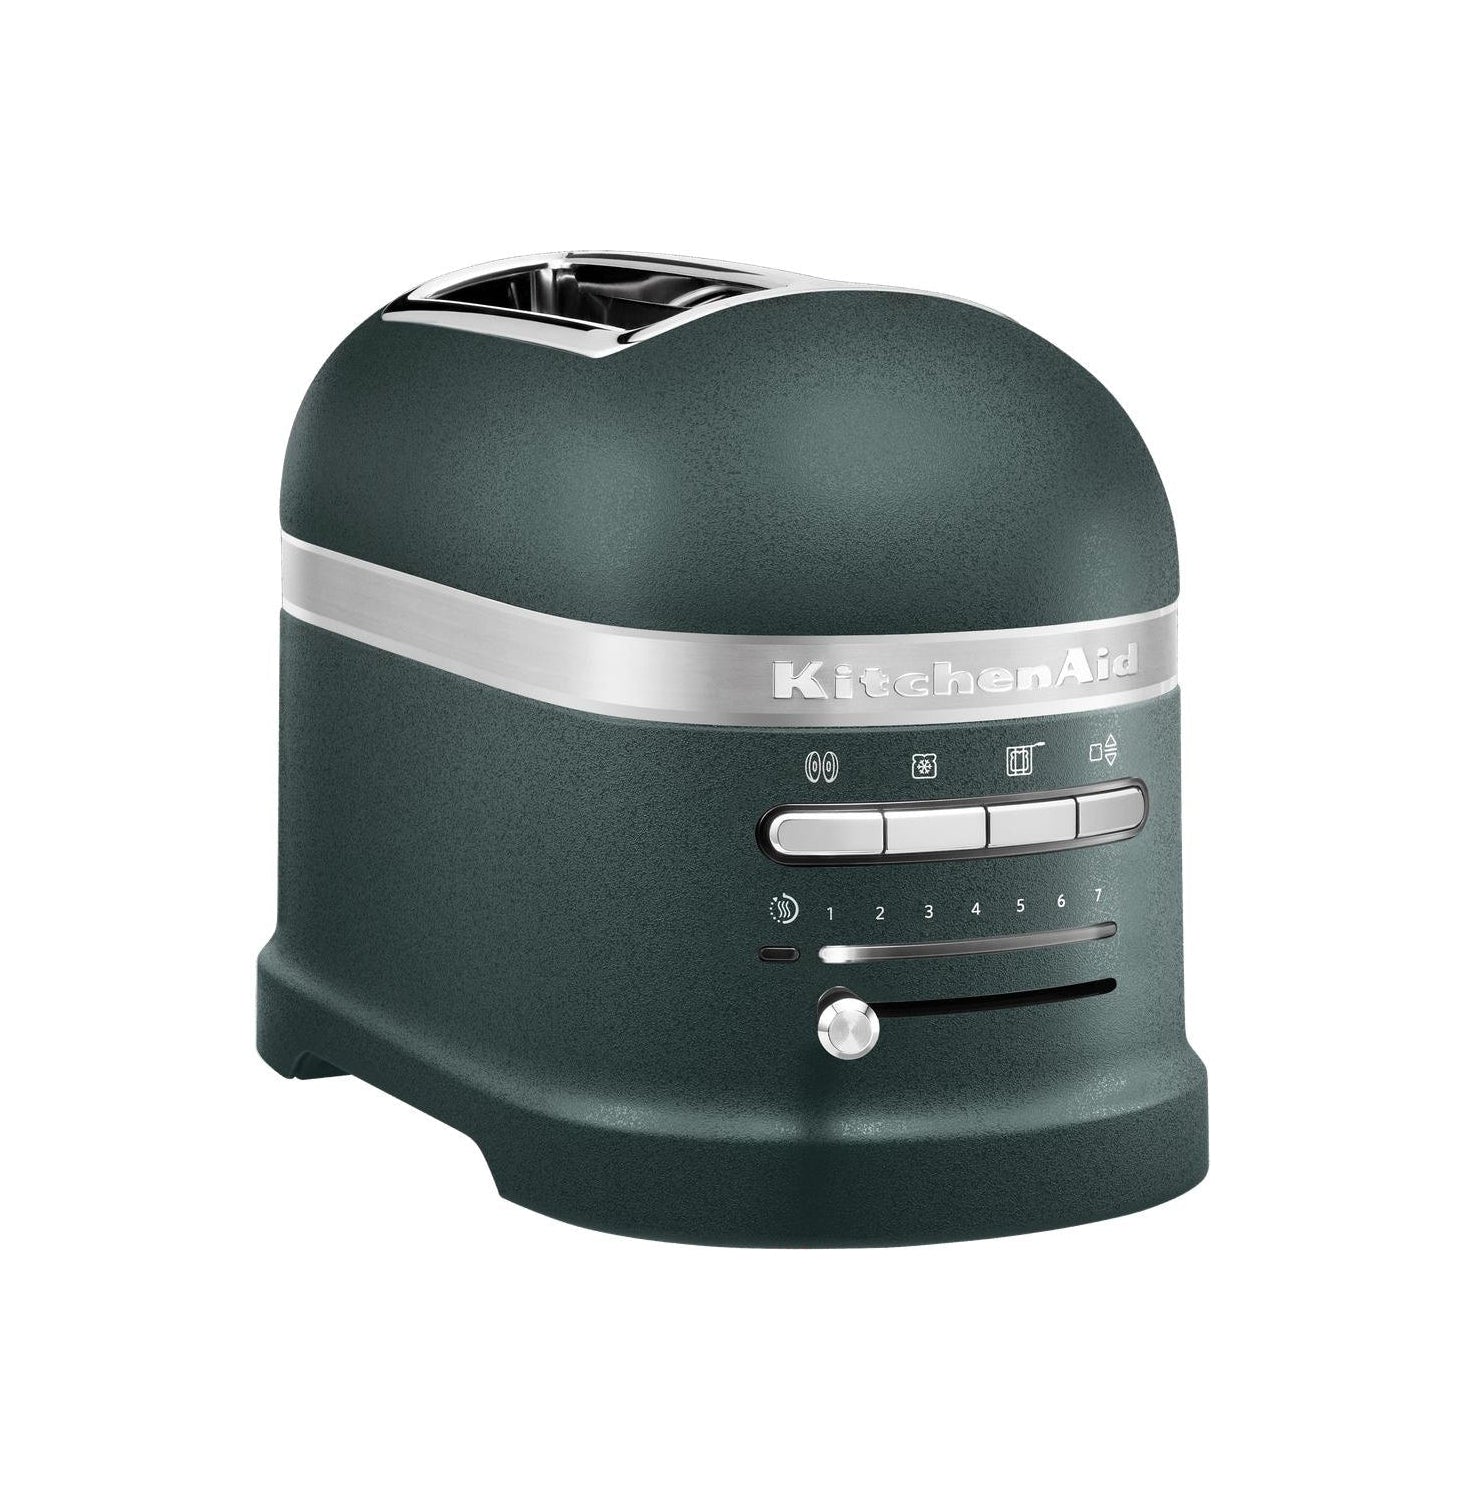 Kitchen Aid 5 Kmt2204 Artisan Toaster For 2 Slices, Pebbled Palm